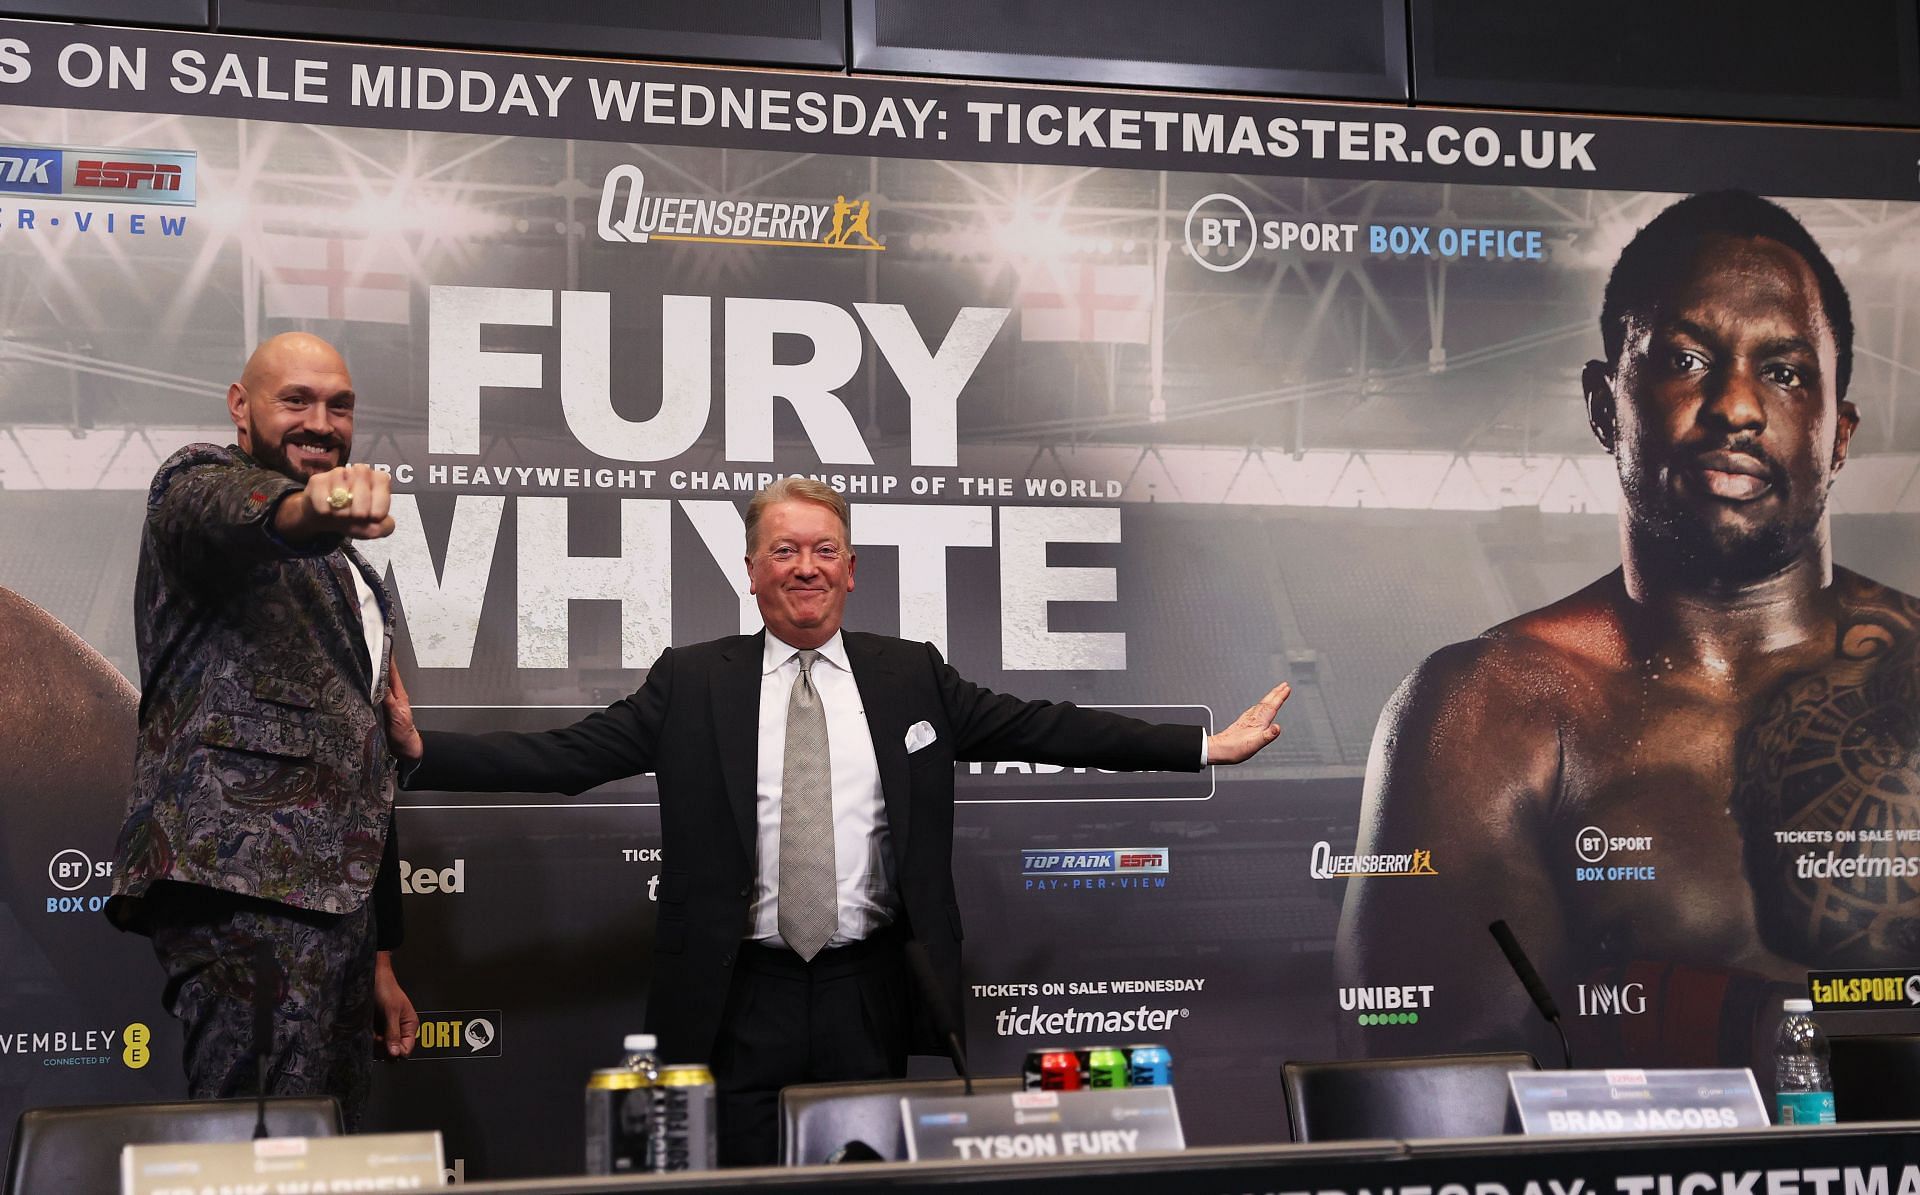 Tyson Fury v Dillian Whyte press conference. Tyson Fury (left) with promoter Frank Warren.